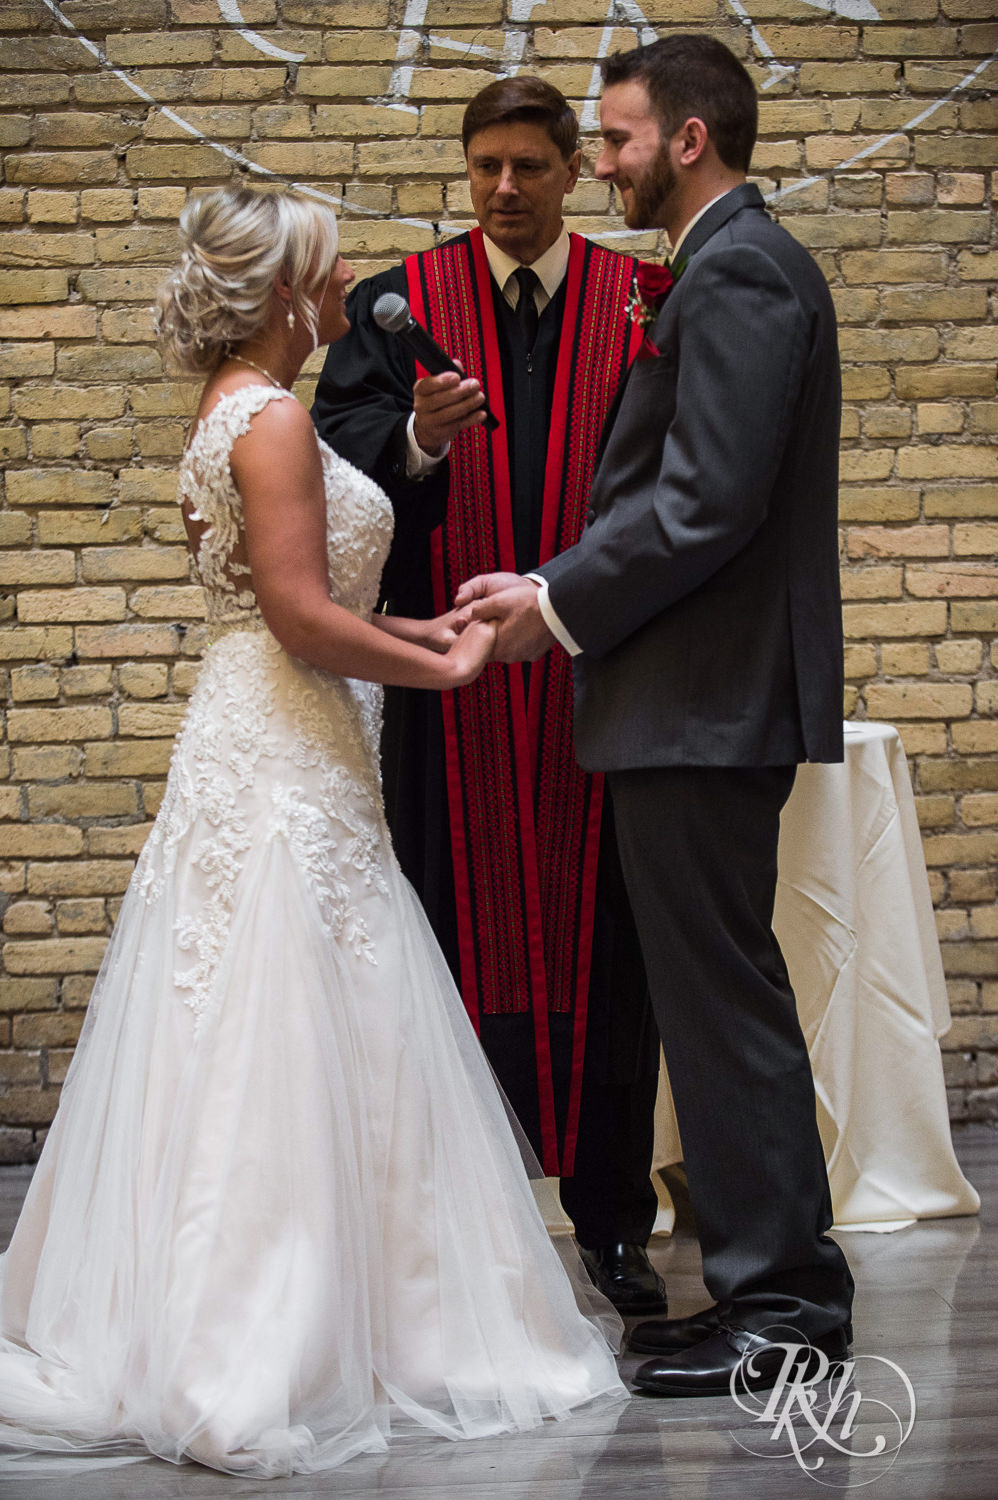 Bride and groom read vows during wedding ceremony at the Lumber Exchange Event Center in Minneapolis, Minnesota.